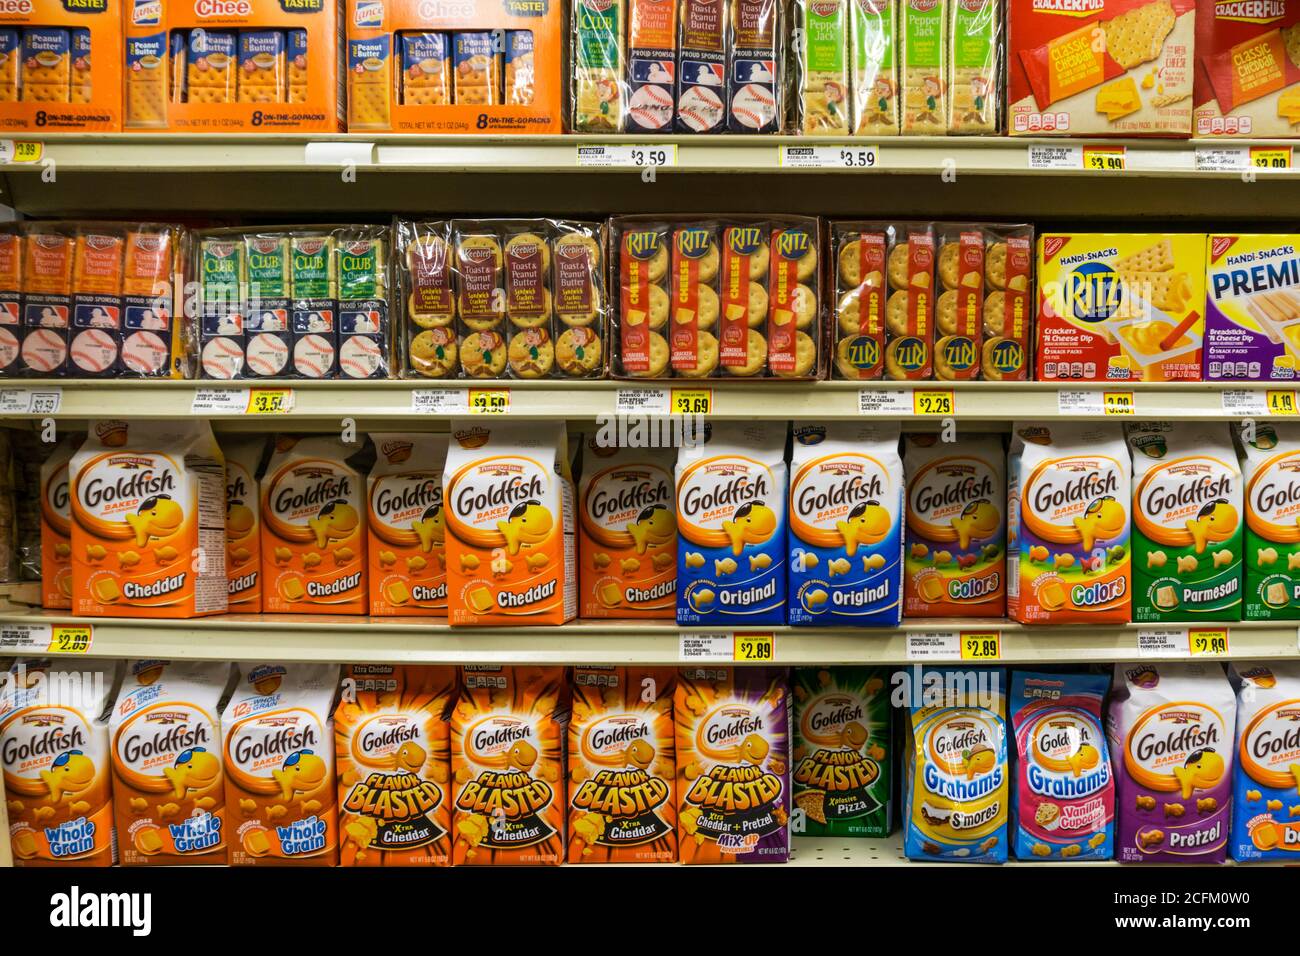 A selection of Keebler, Ritz and Goldfish crackers for sale in an American supermarket. Stock Photo